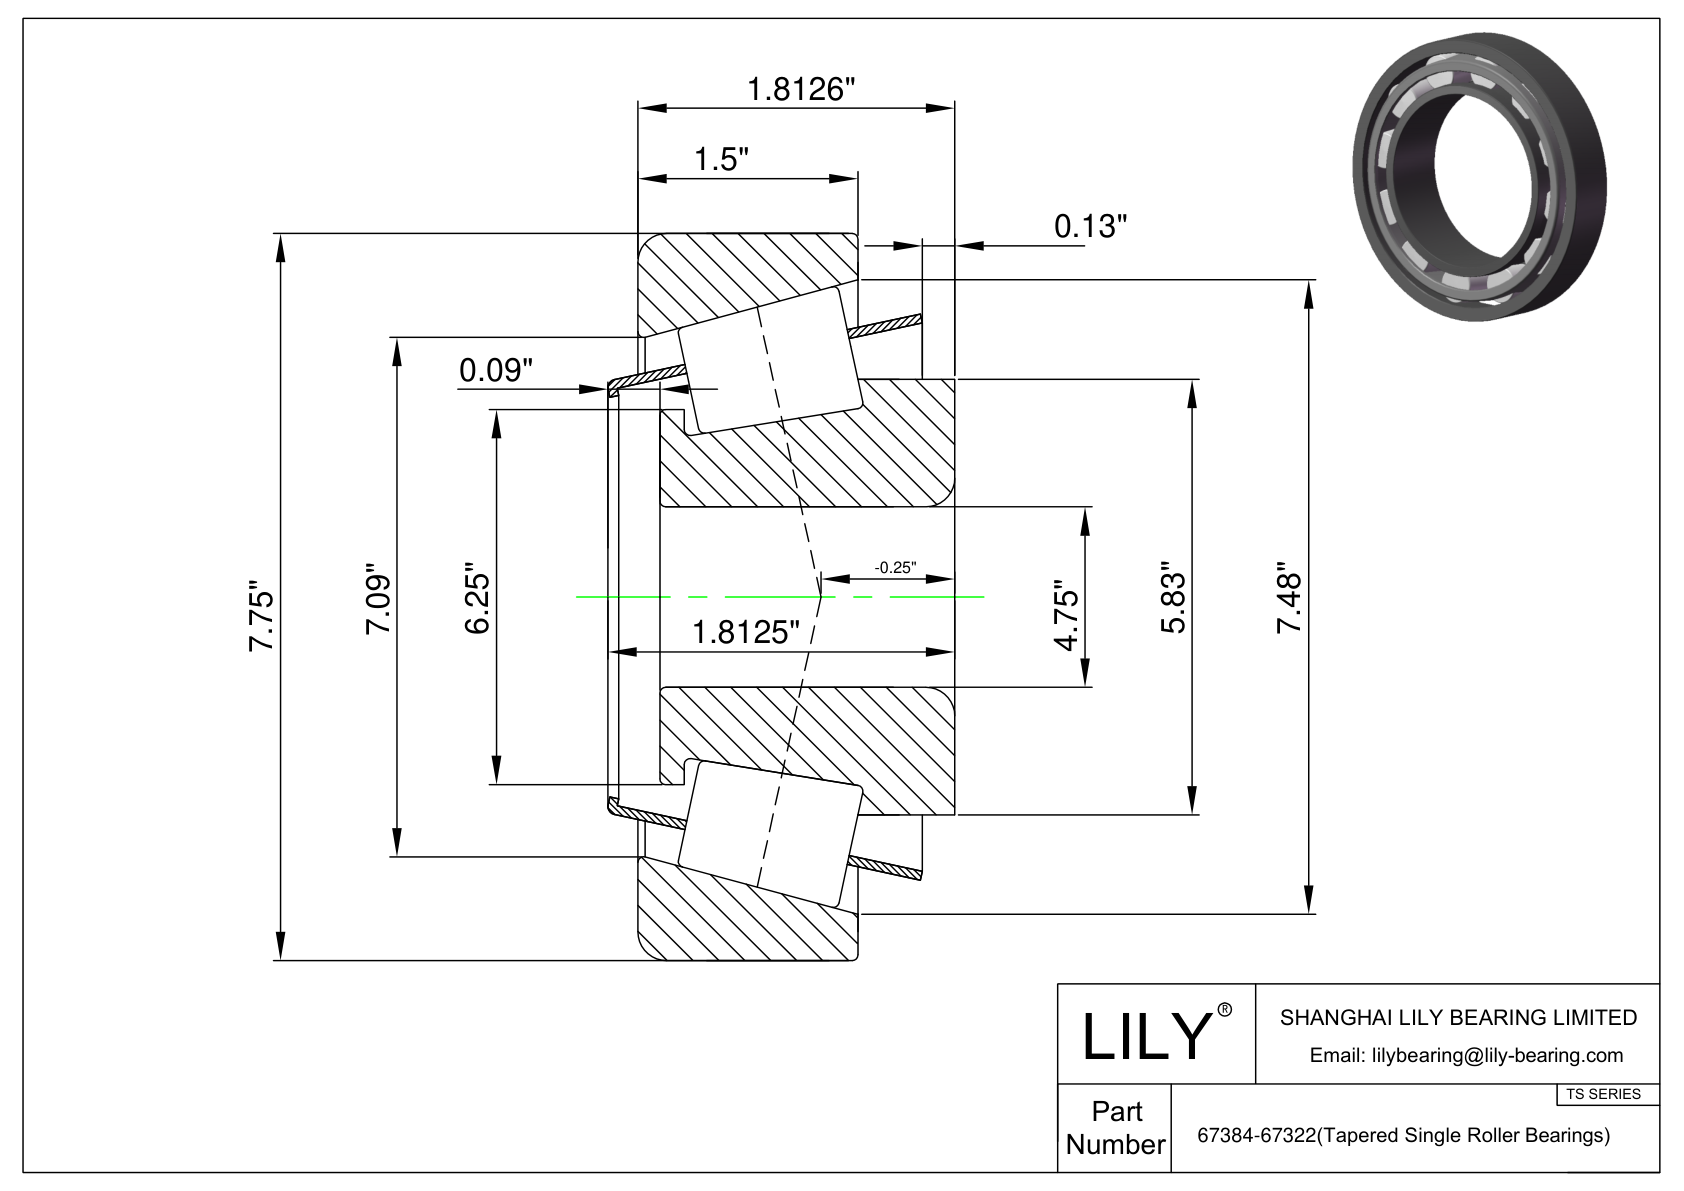 67384-67322 TS (Tapered Single Roller Bearings) (Imperial) cad drawing